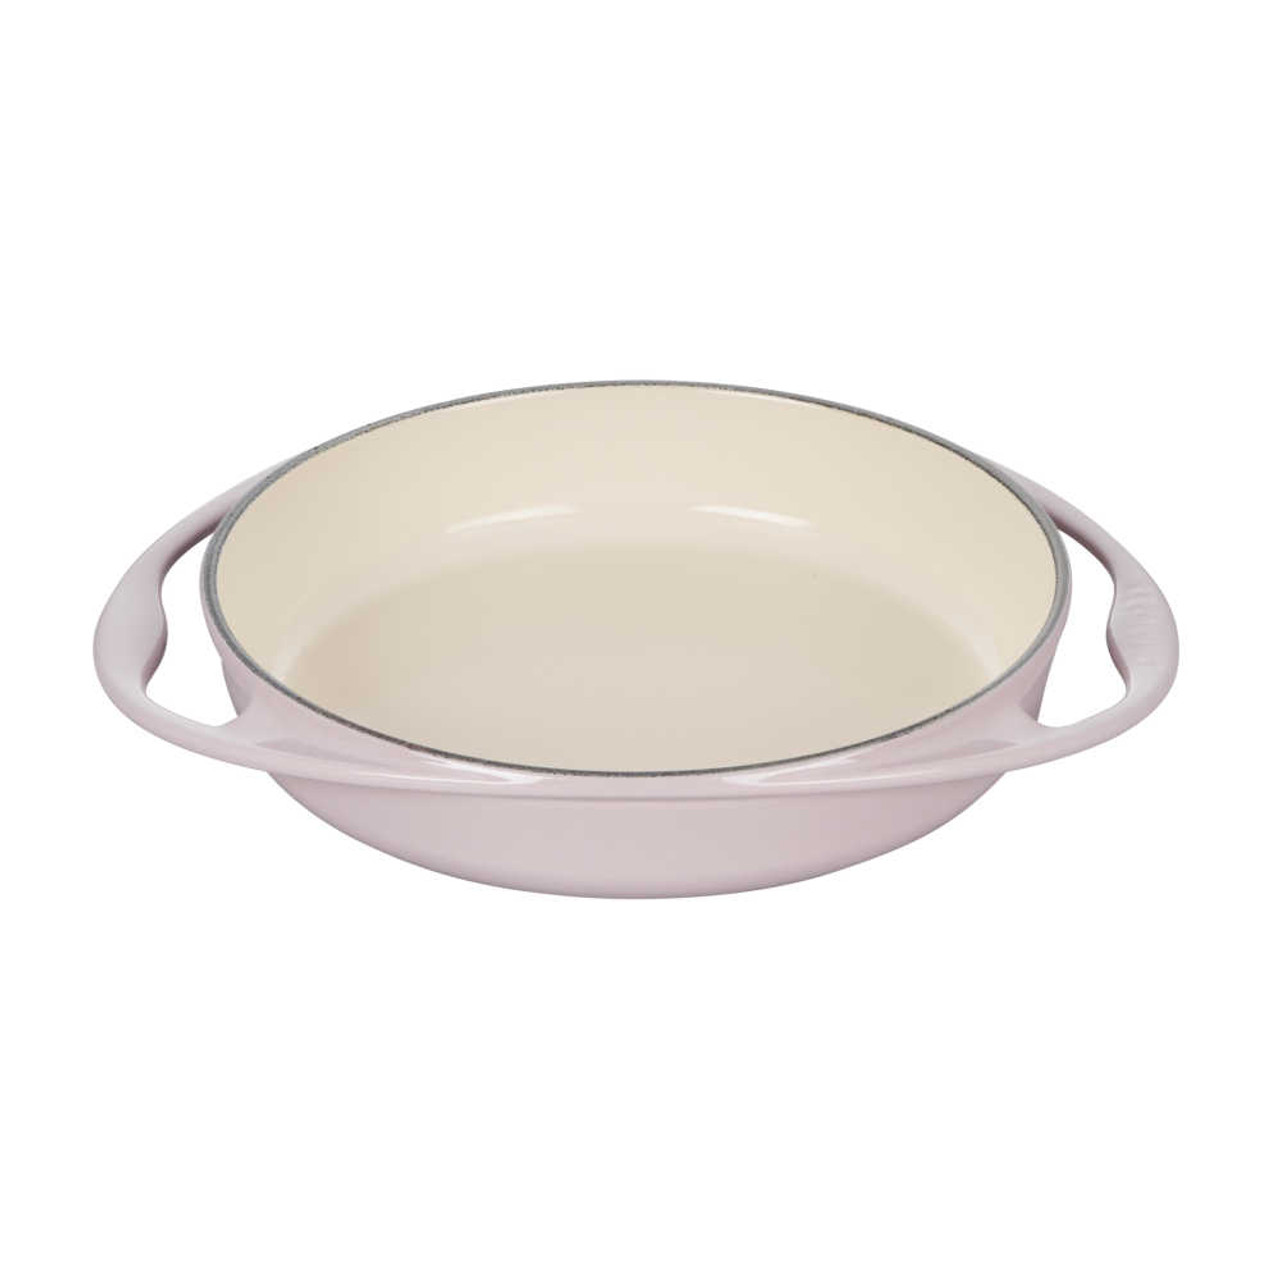 Kitchen Corners: Emile Henry Tarte Tatin Pan- Product Review and a